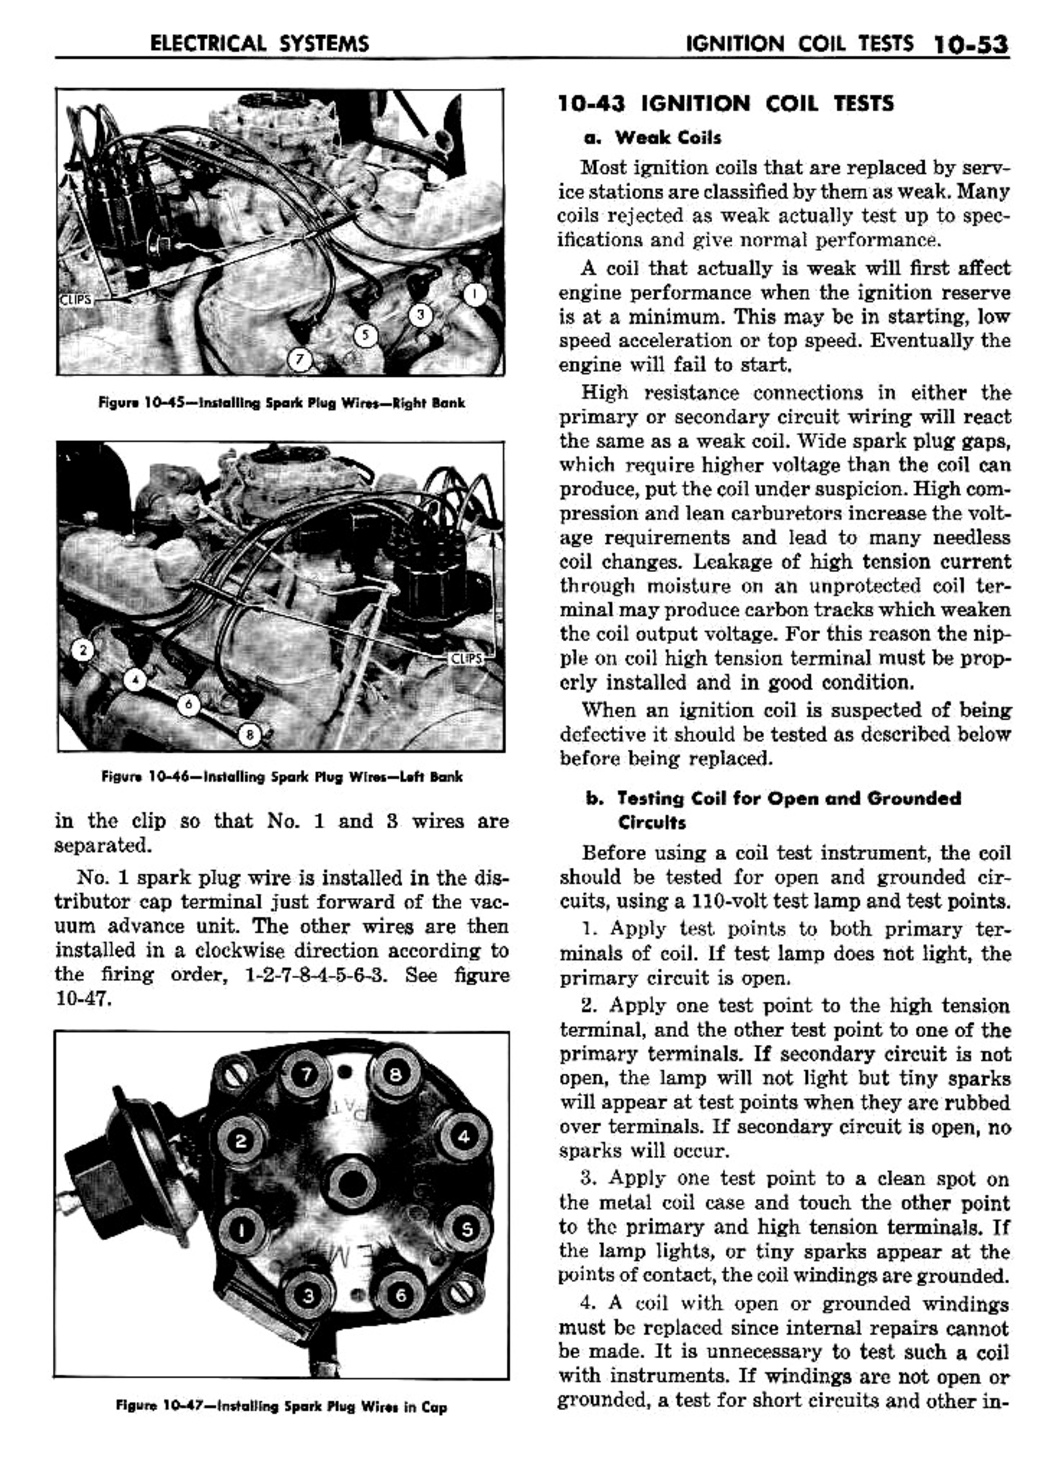 n_11 1957 Buick Shop Manual - Electrical Systems-053-053.jpg